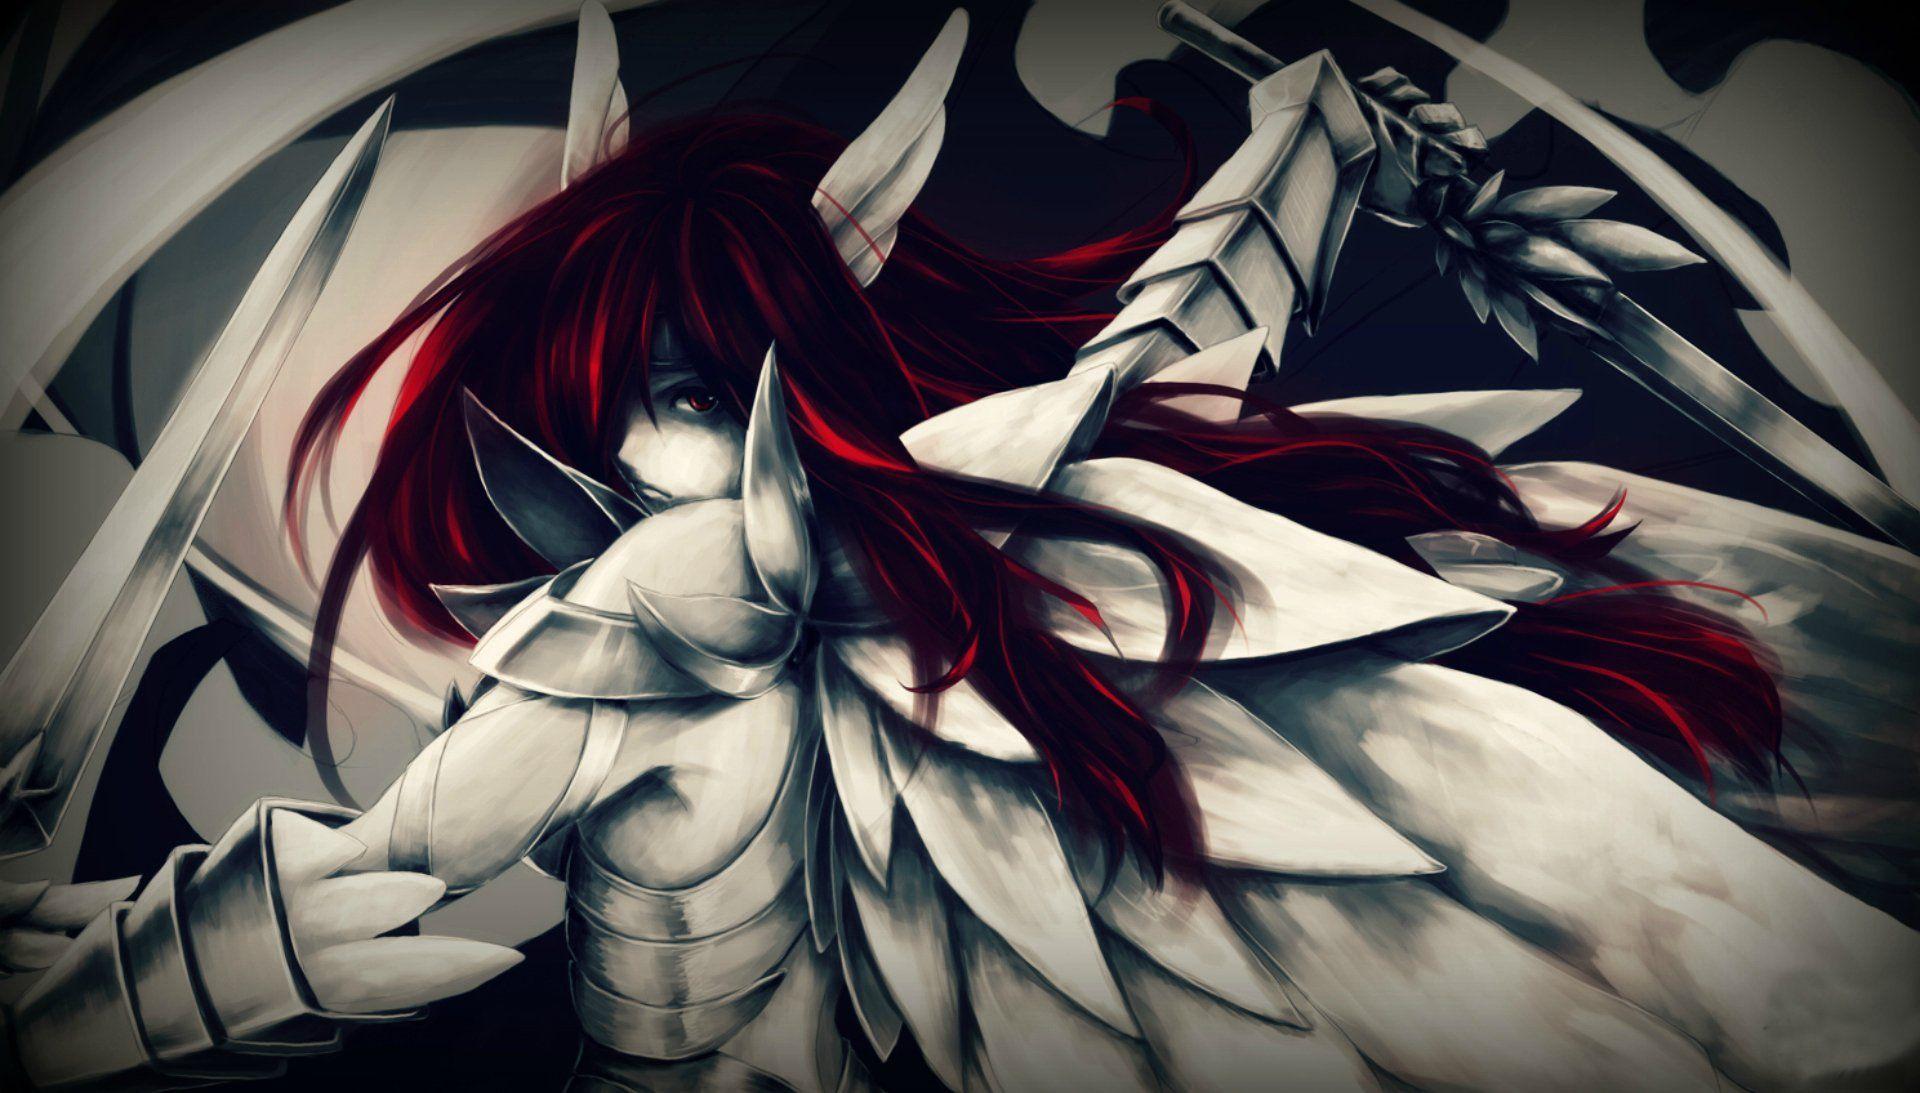 Desktop Wallpaper Erza Scarlet Fairy Tail Fighting Mood Hd Image  Picture Background G3hrge